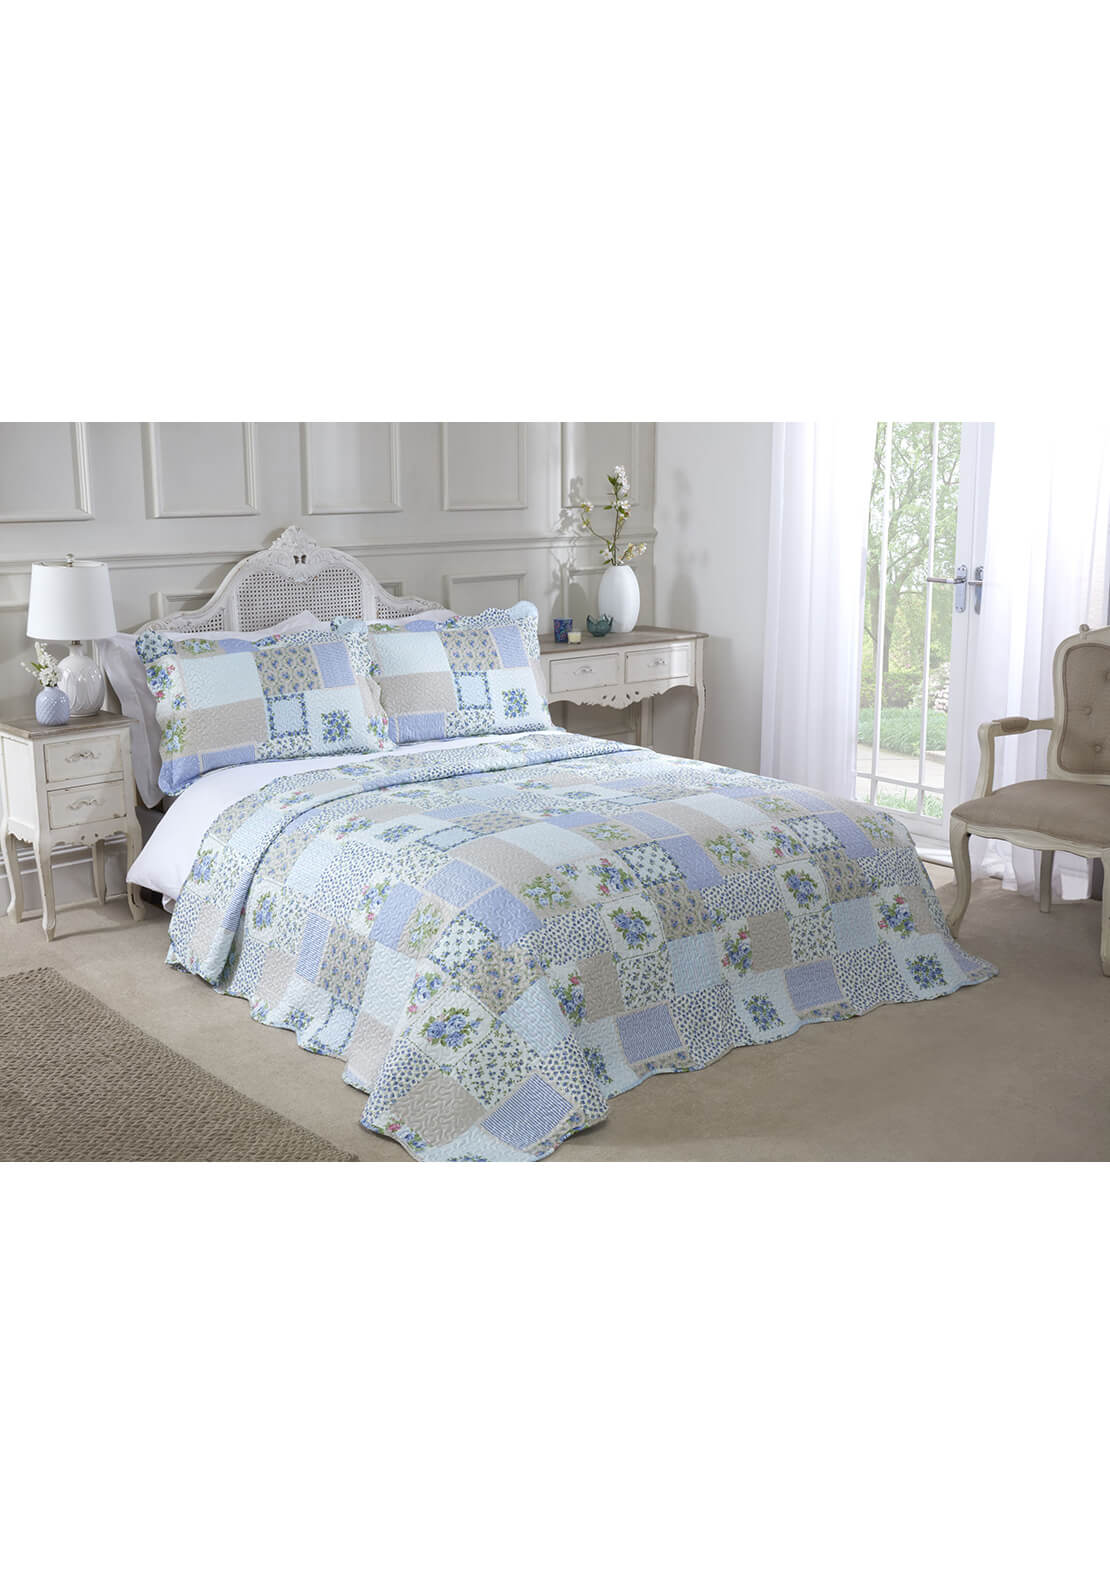 The Home Collection Patchwork Bedspread Sets 1 Shaws Department Stores